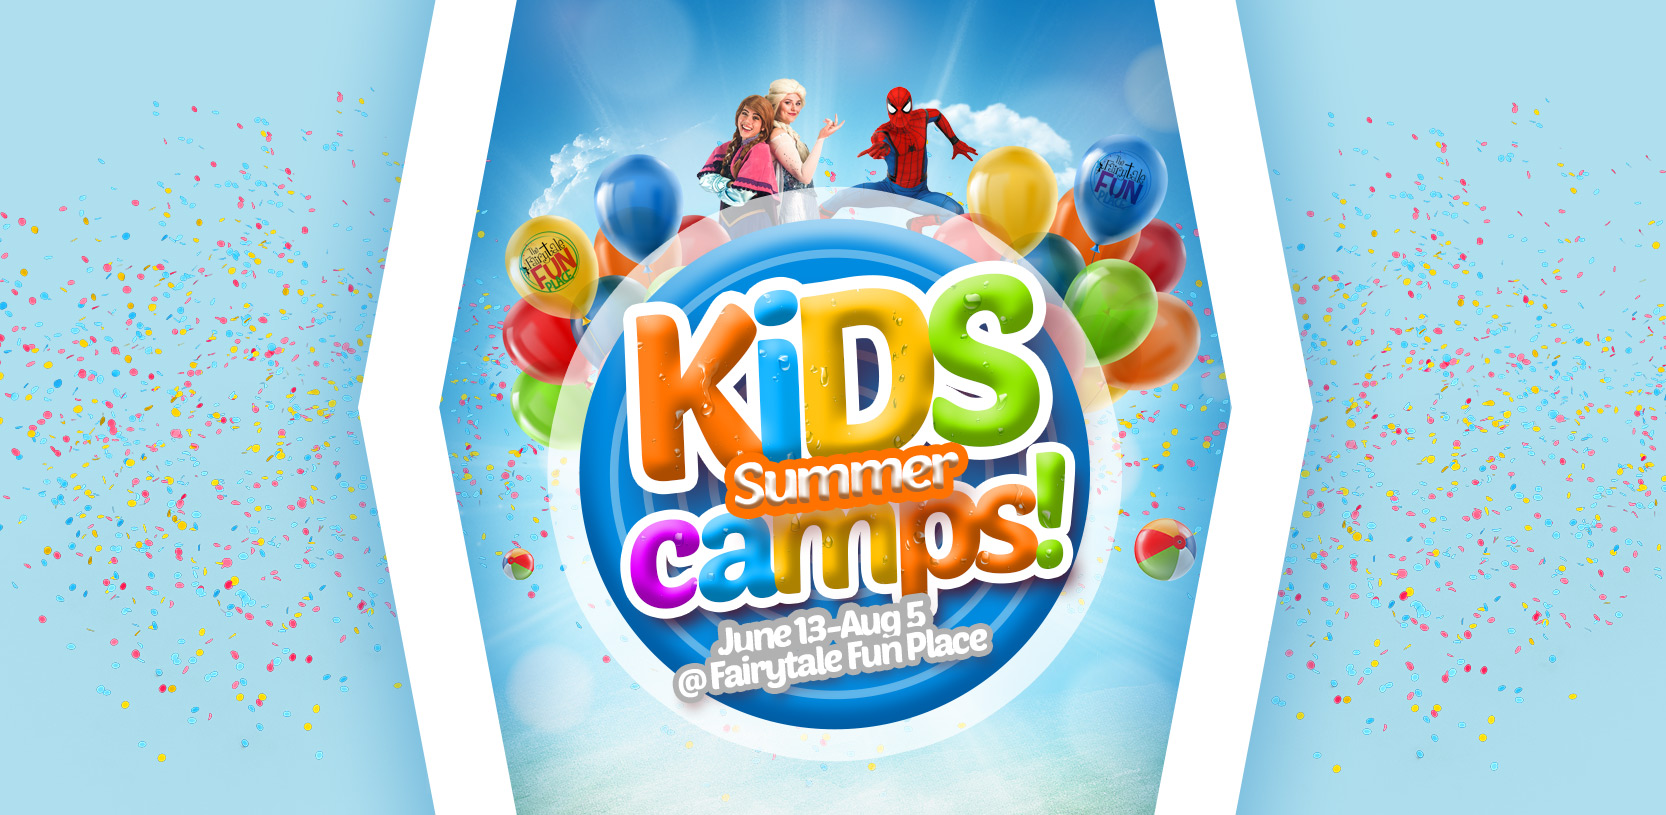 summer camps for kids in clarkston michigan at the fairytale fun place